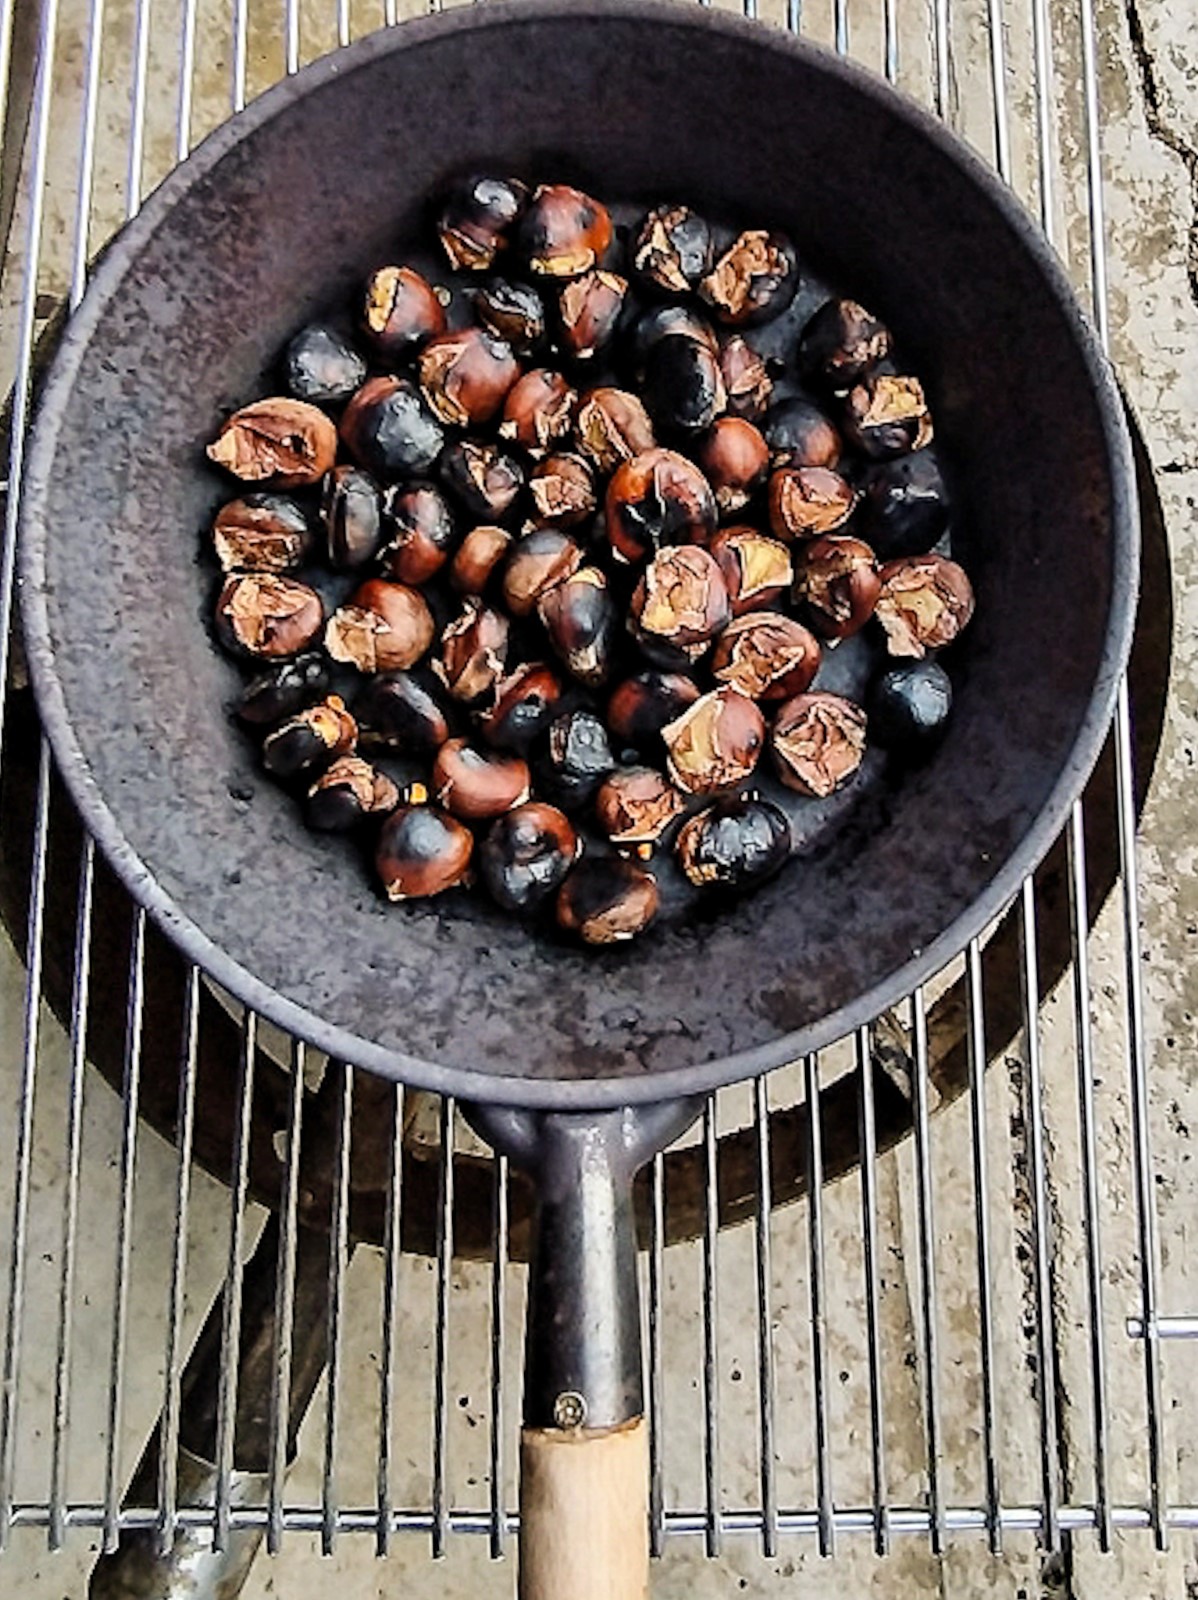 Delicious Roasted Chestnuts - Roasted Chesnuts